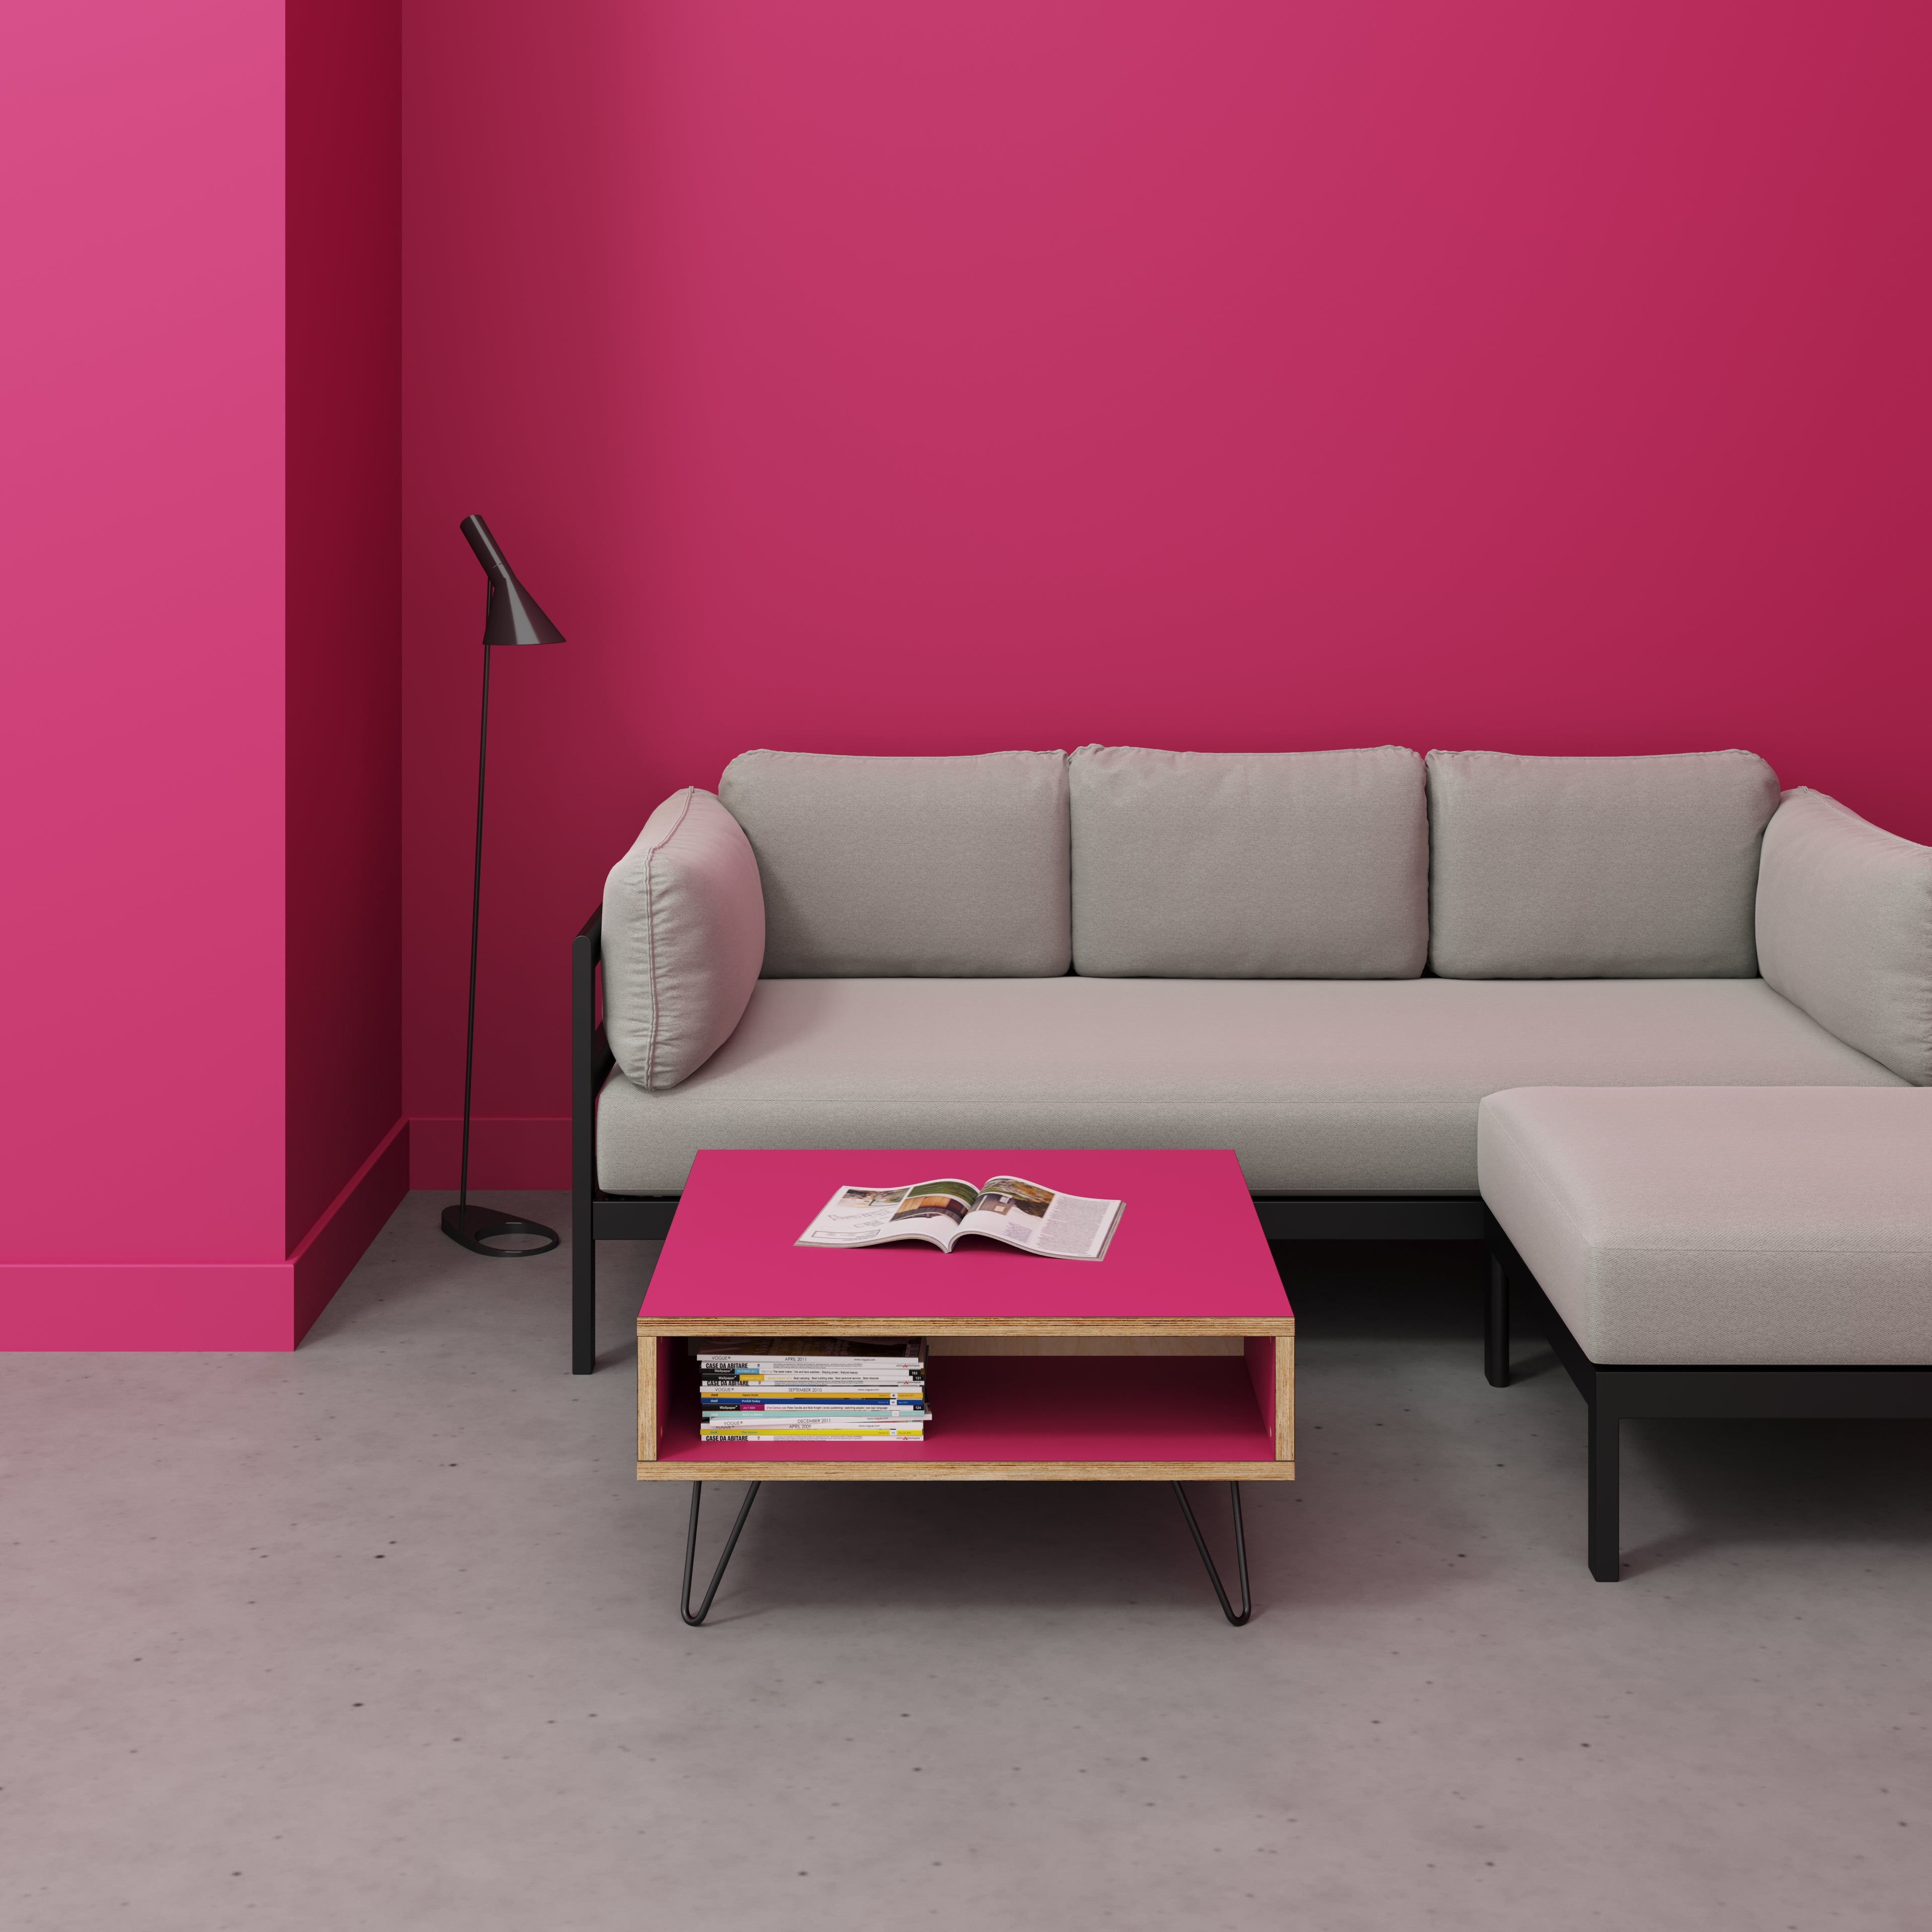 Coffee Table with Box Storage and Black Hairpin Legs - Formica Juicy Pink - 800(w) x 800(d) x 400(h)